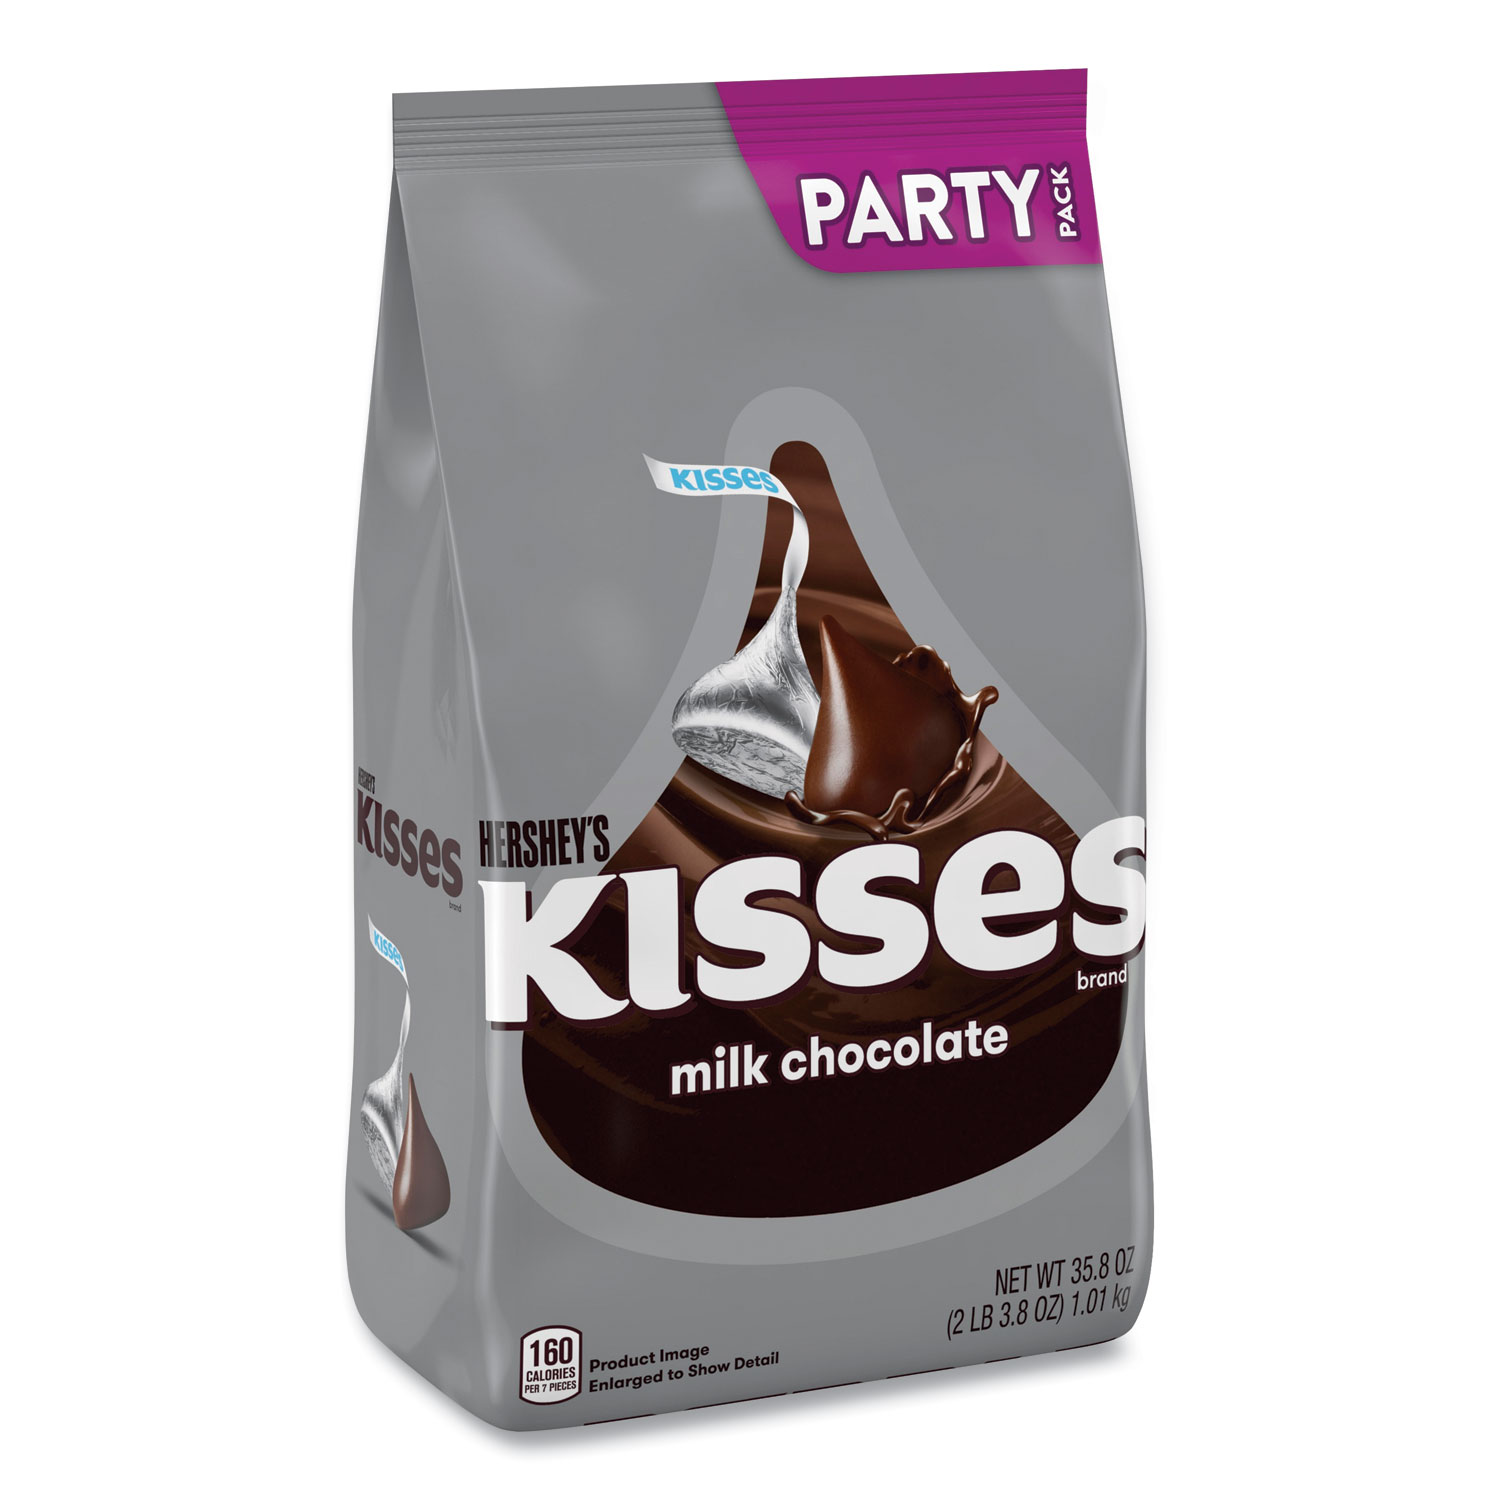  Hershey's 13480 KISSES, Milk Chocolate Party Pack, Silver Wrappers, 35.8 oz Bag, Free Delivery in 1-4 Business Days (GRR24600400) 